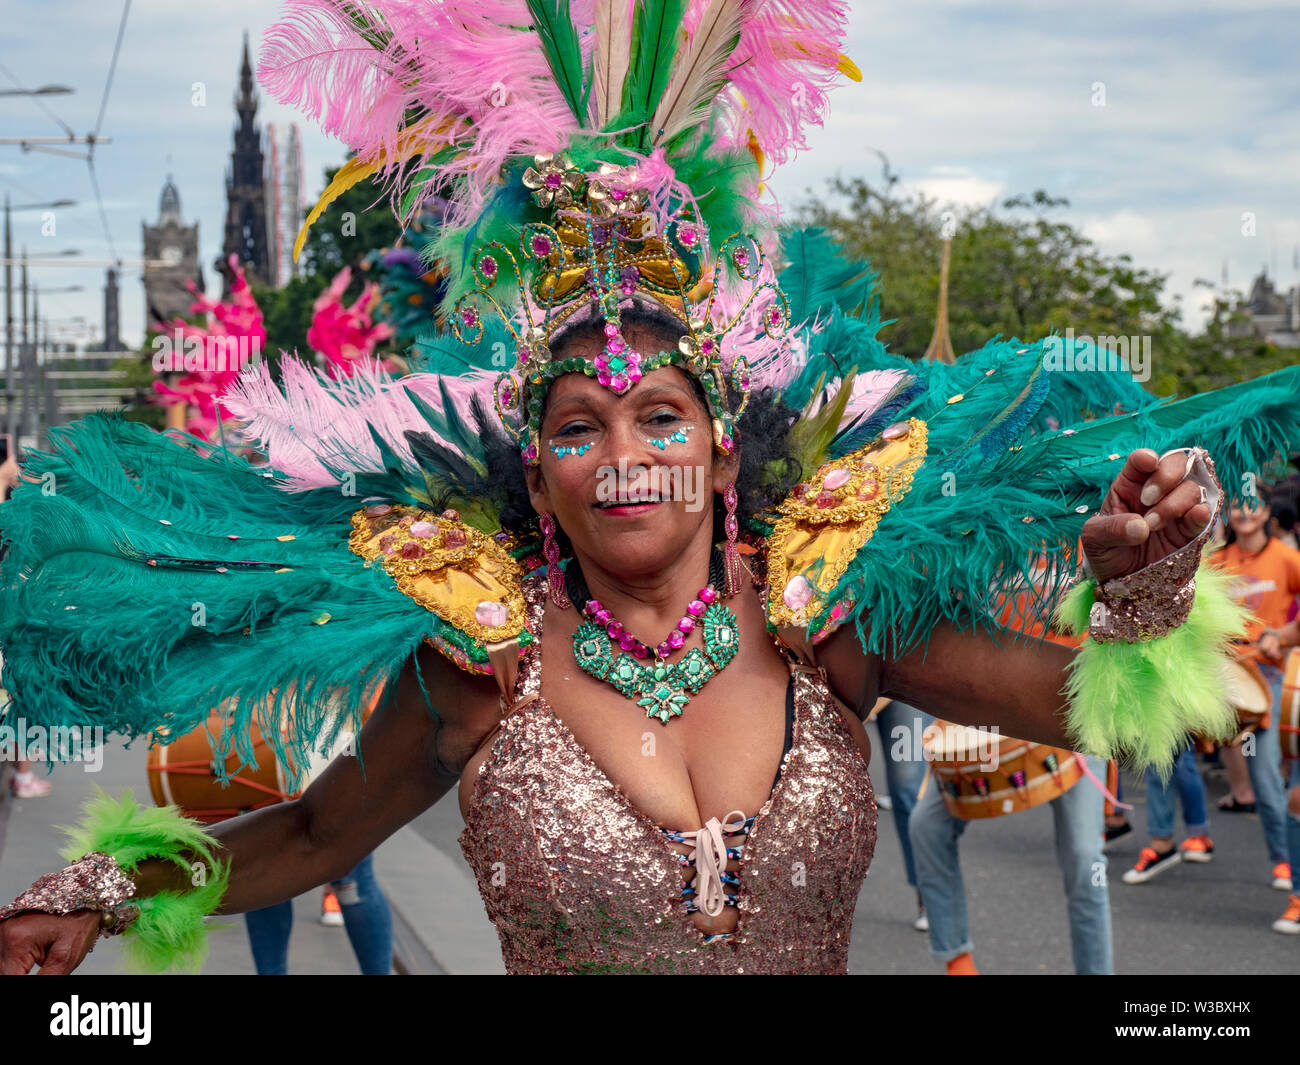 14 July 2019 Edinburgh - Edinburgh Festival Carnival Parade - 700 Performers: Music, dance, circus acrobats, puppetry from all over the world. Stock Photo